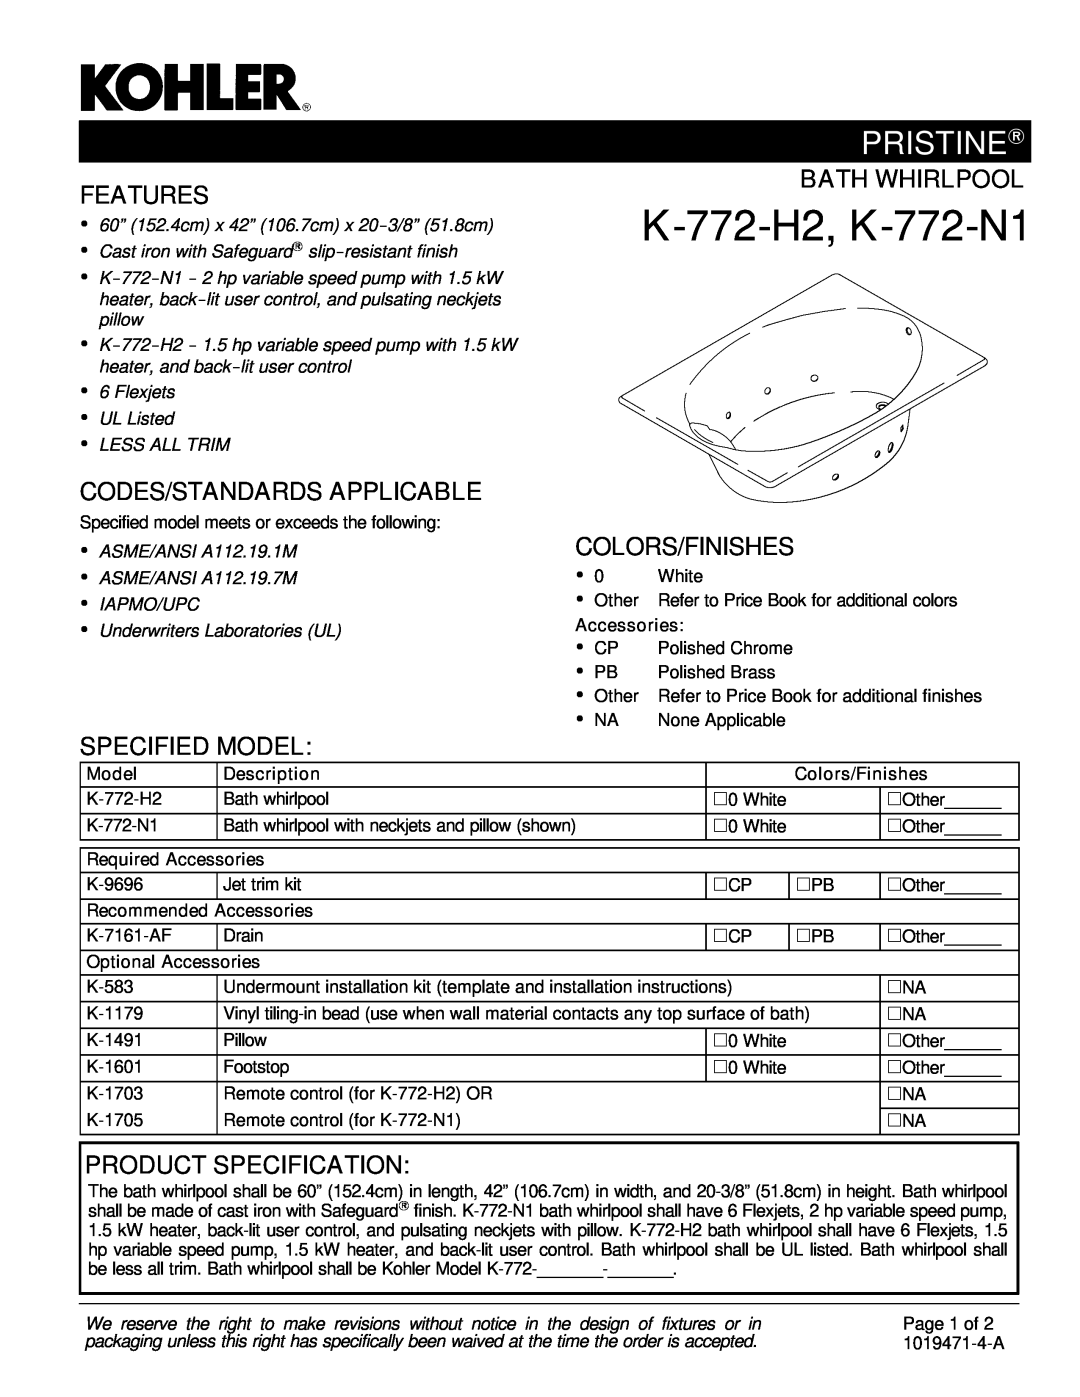 Kohler K-772-N1 installation instructions Pristine, Features, Codes/Standards Applicable, Specified Model, Bath Whirlpool 